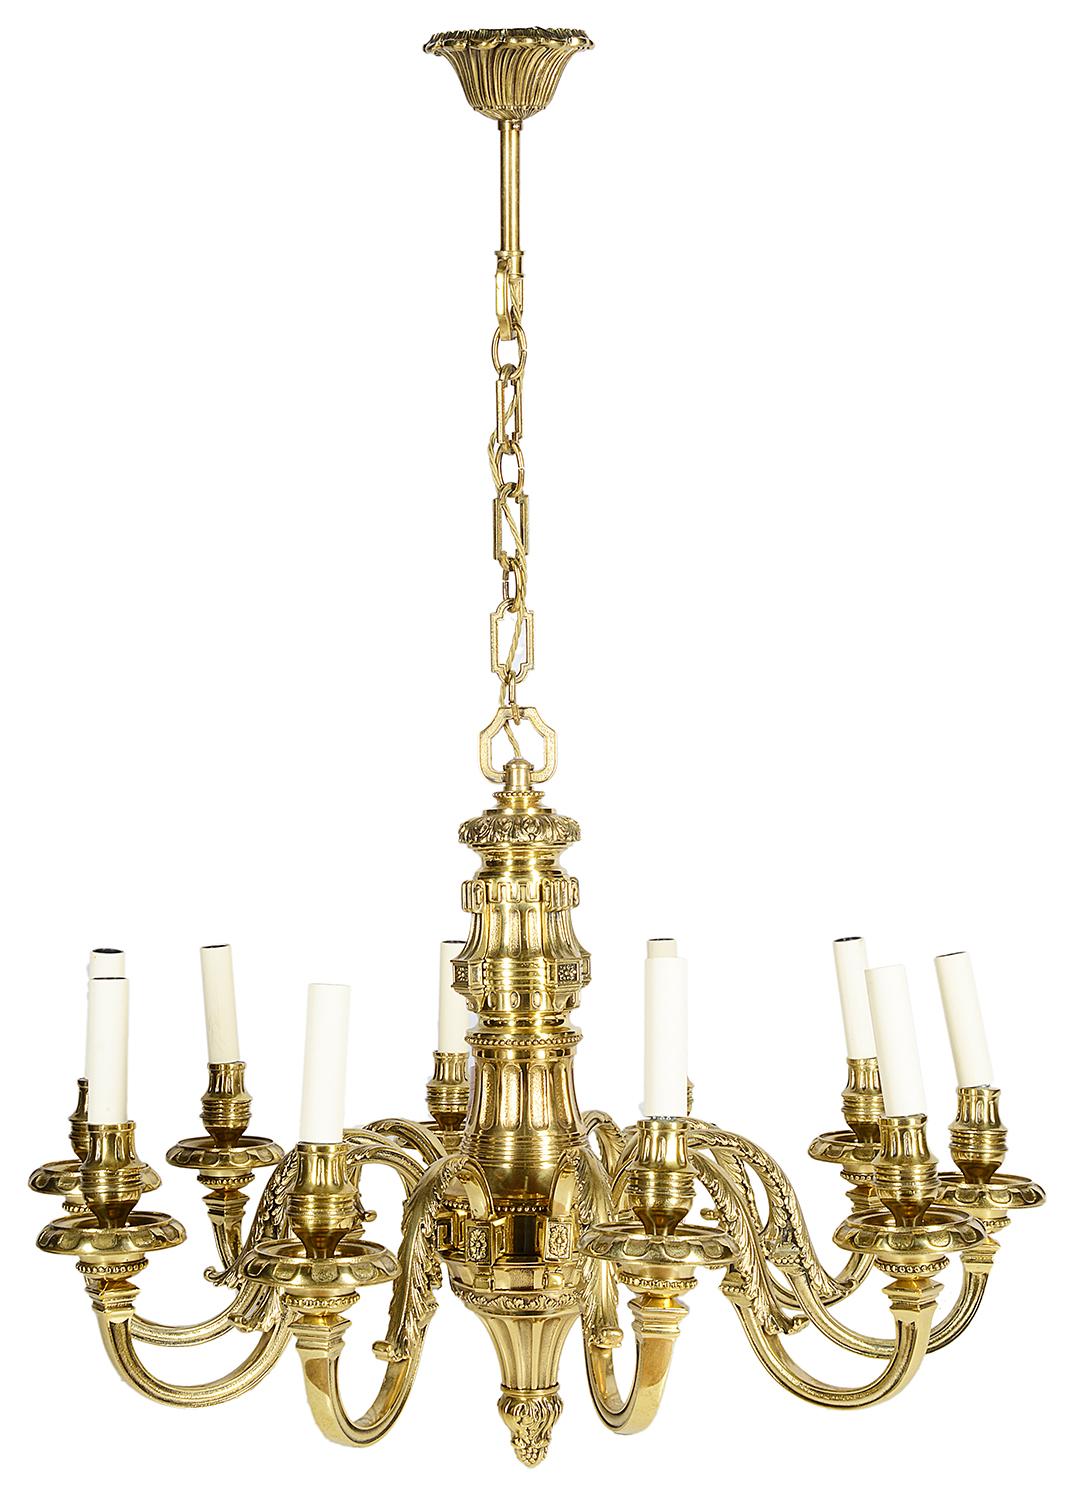 A good quality pair of 19th century classical ormolu chandeliers, each having 10 branches, with scrolling foliate and motif decoration.
Wired for electricity.